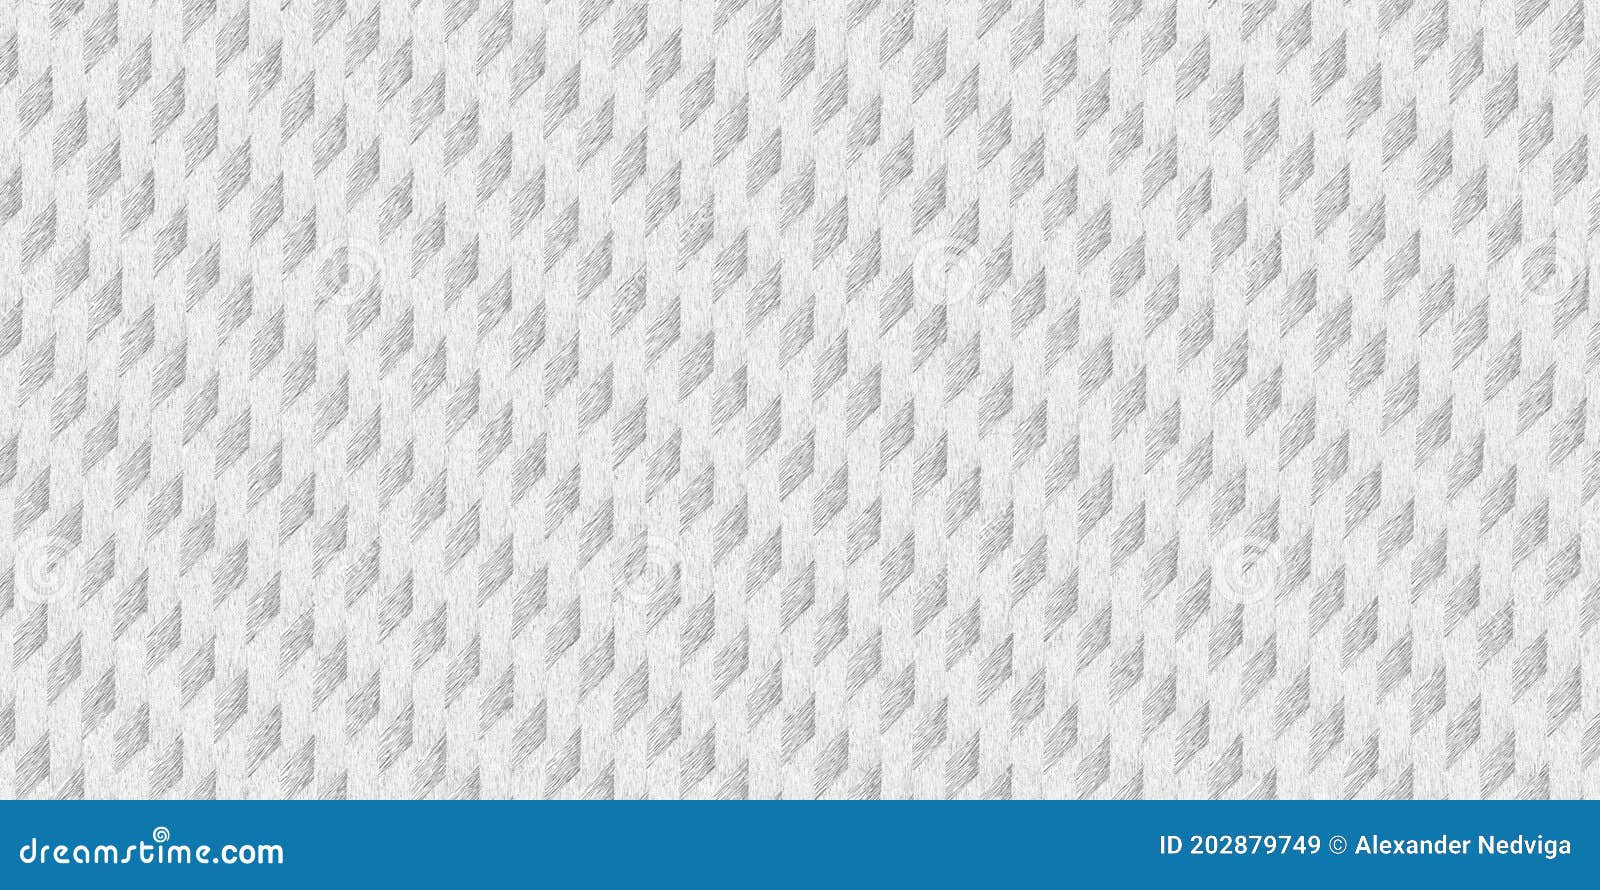 Woven Silver Metal Texture. Seamless Tiling Stock Image - Image of ...